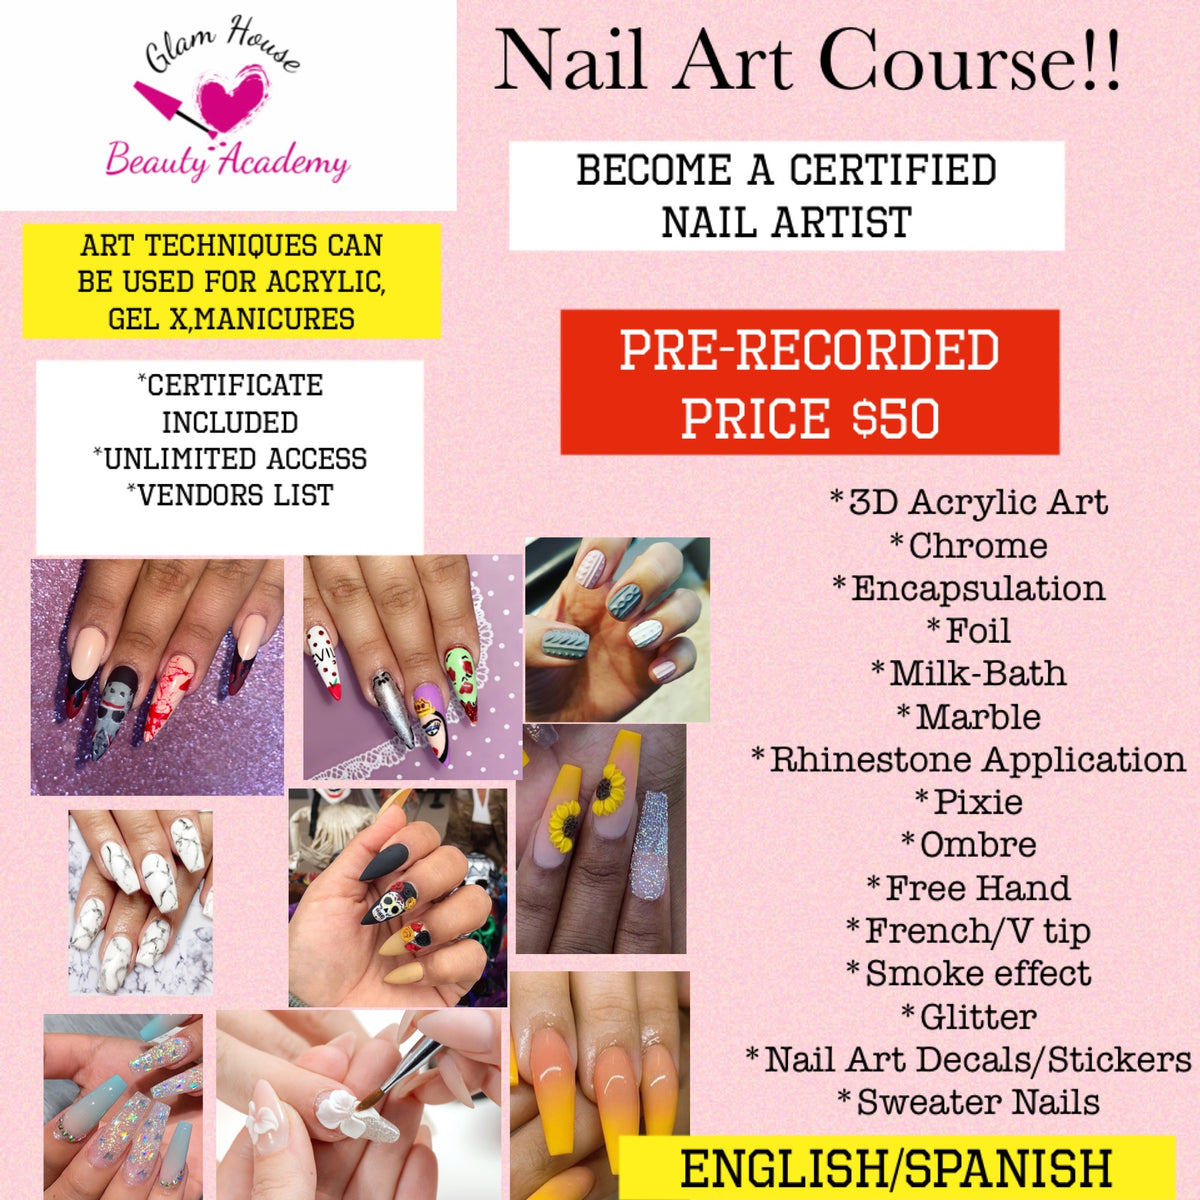 Online Airbrush Nail Art – GlamHouse Beauty Academy and Beauty Store